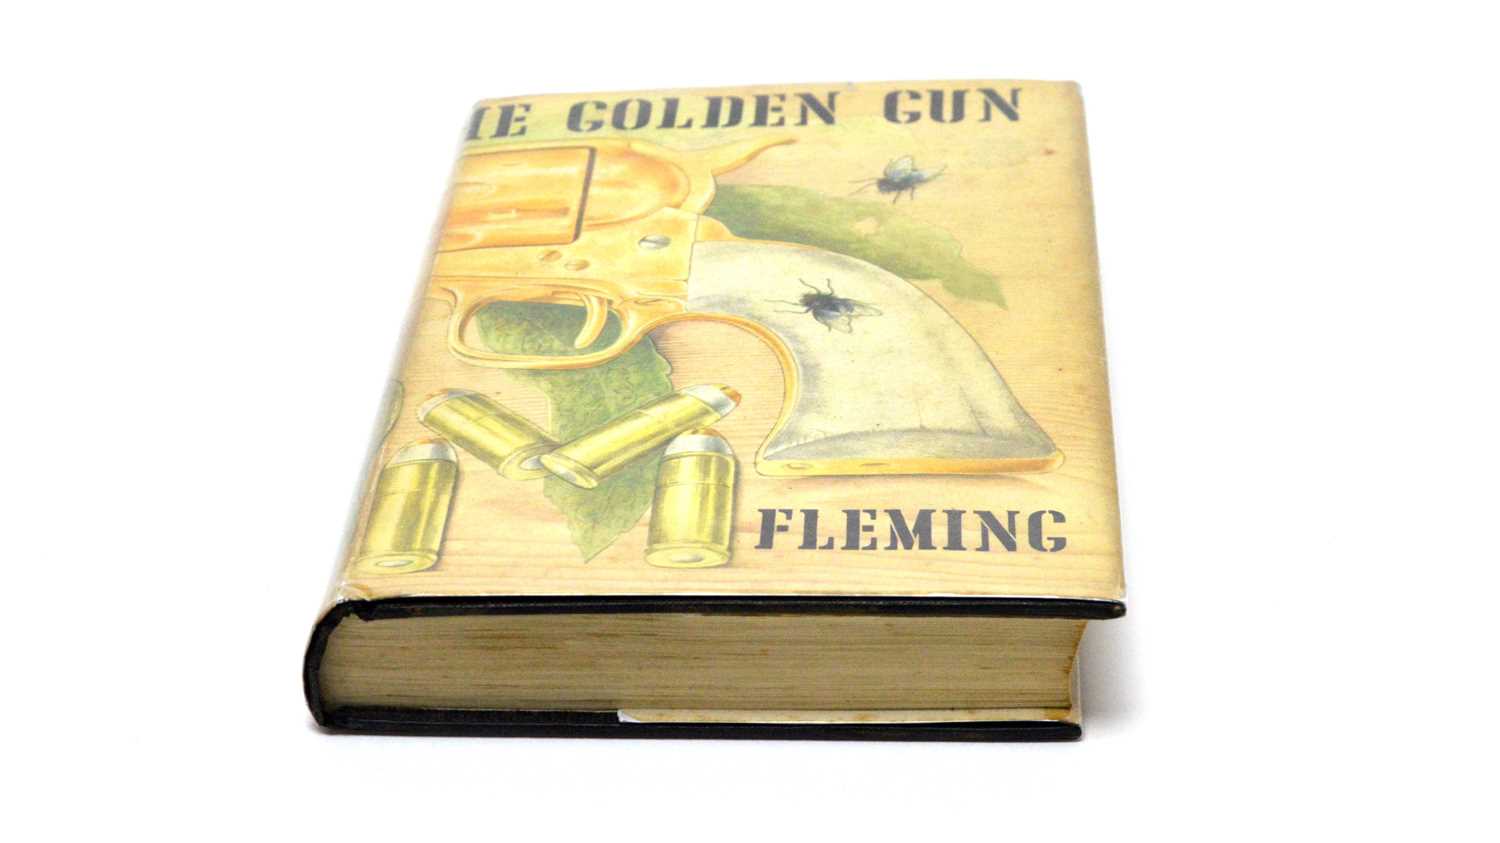 Lot 29 - The Man With The Golden Gun.